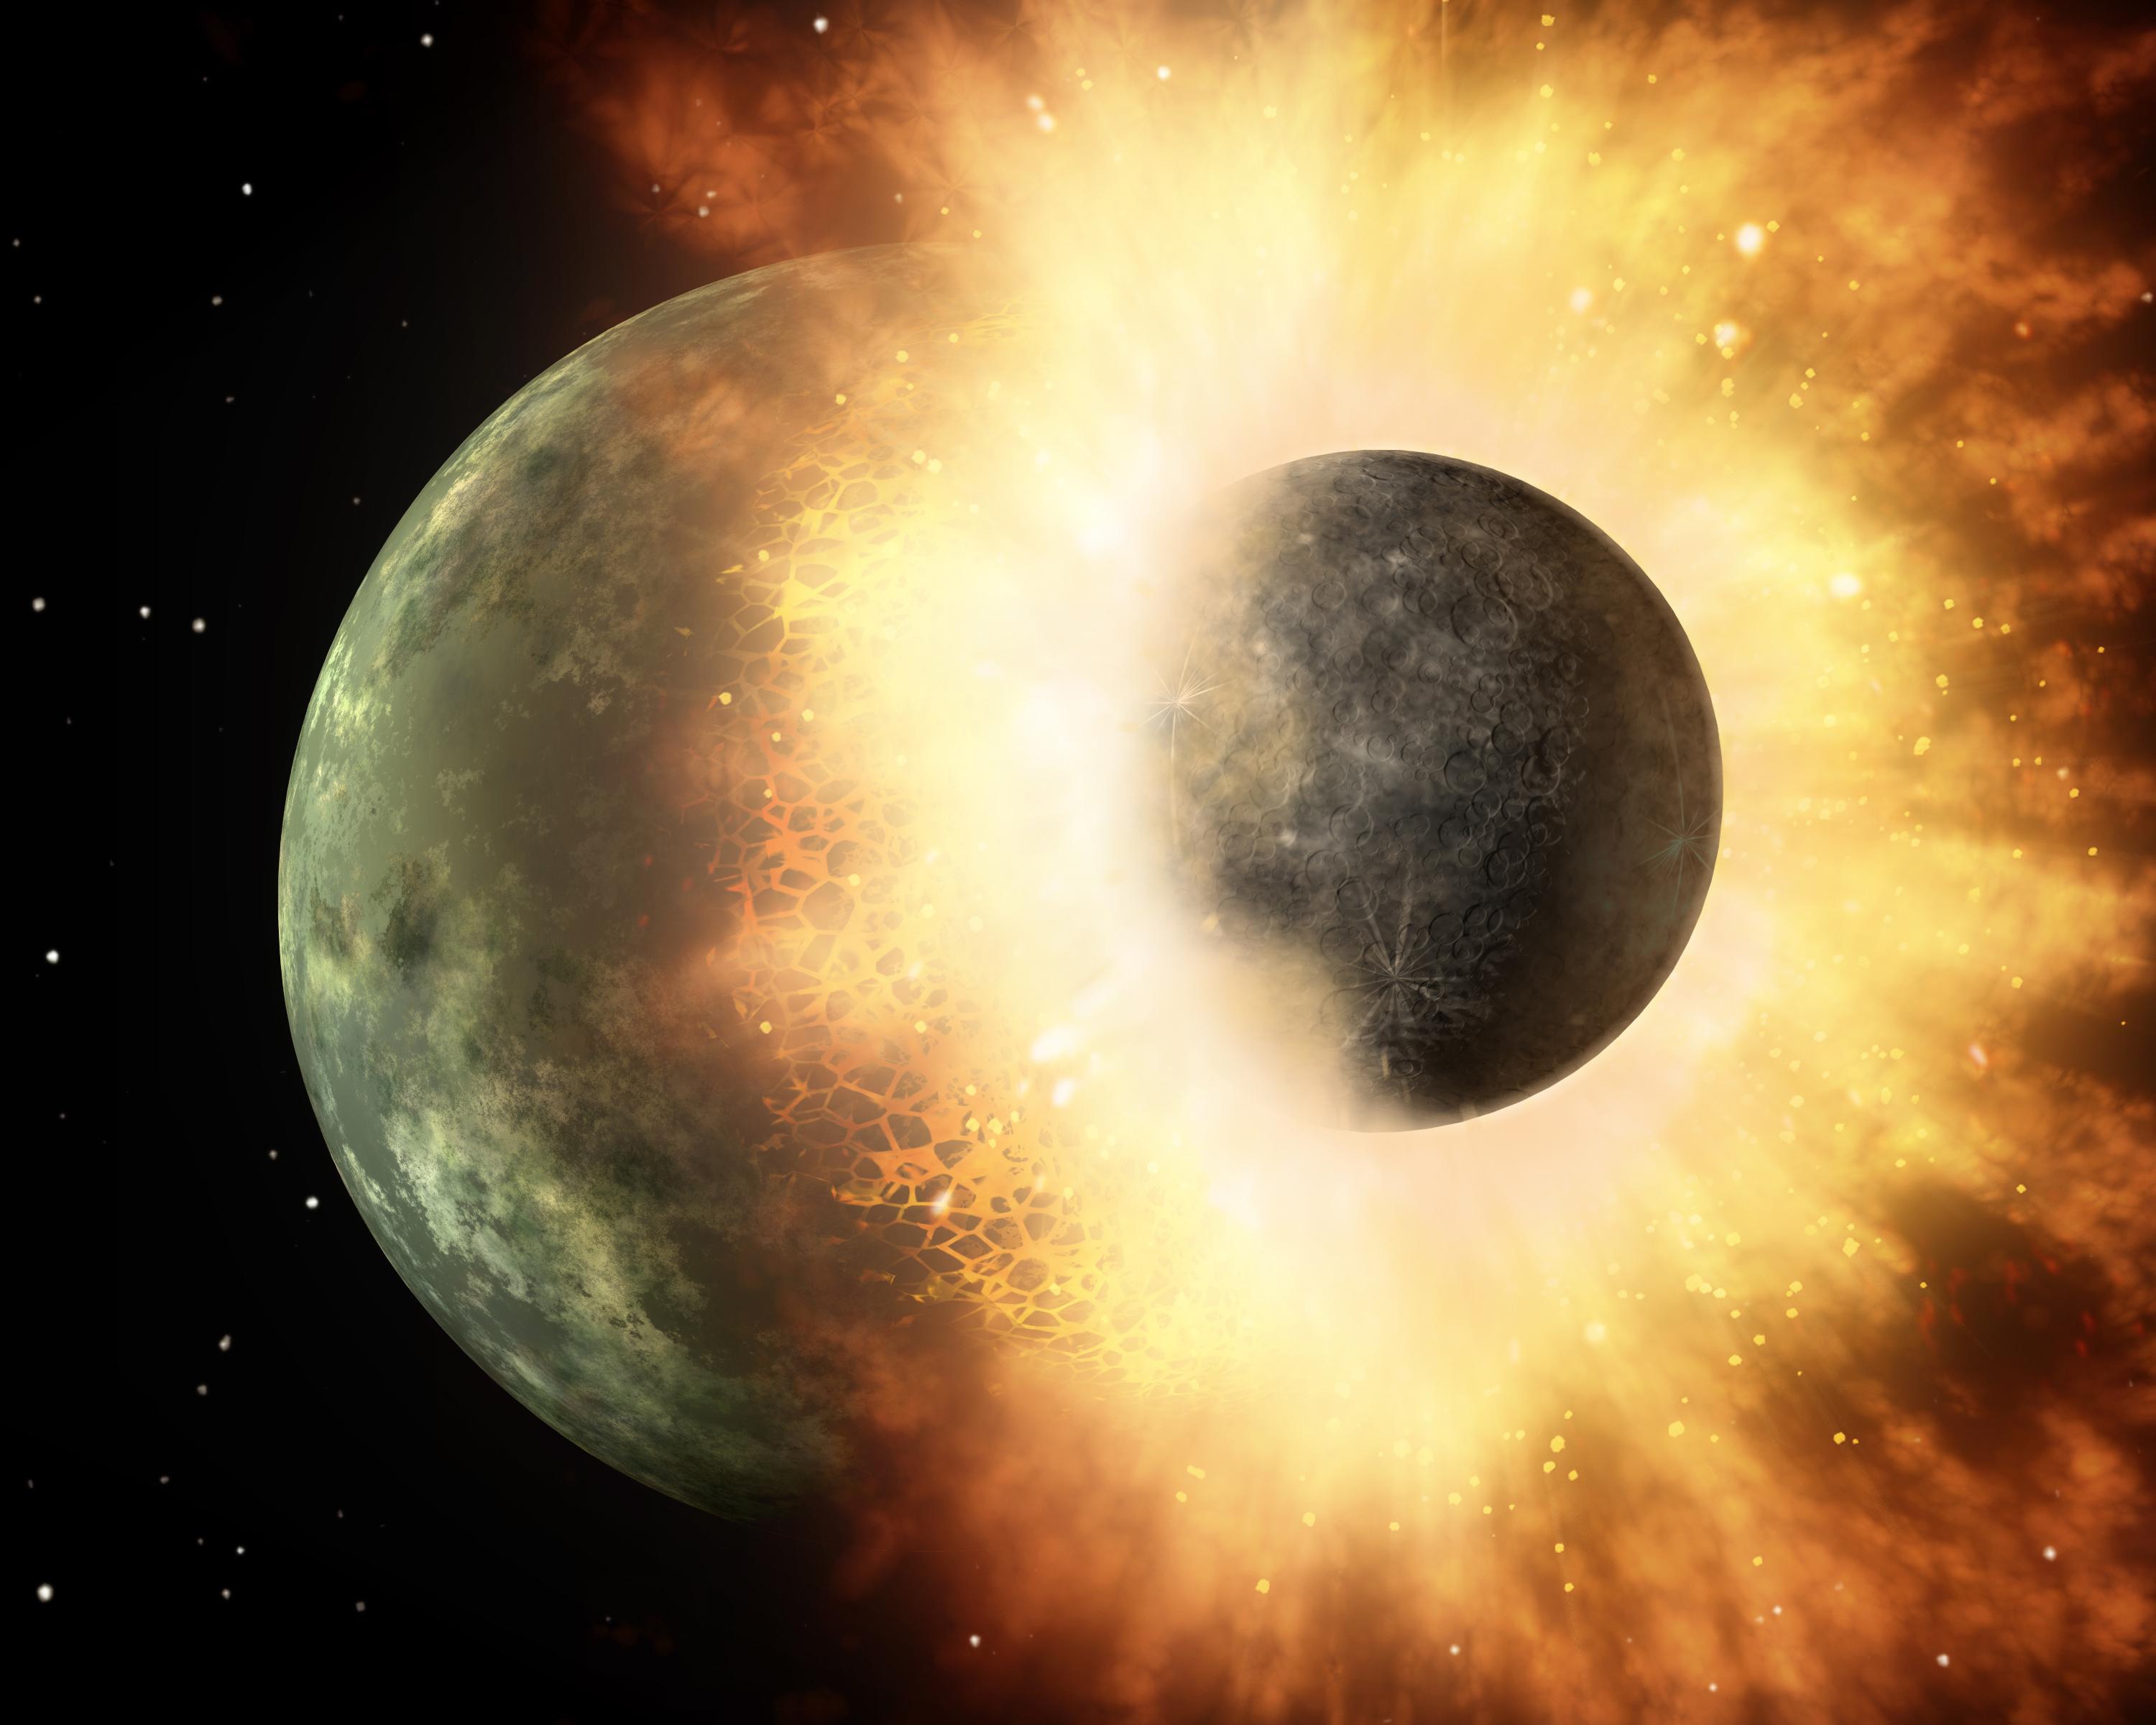 An artist's rendering of a moon with a hole in it, showcasing the fascinating formation process of planet Earth.